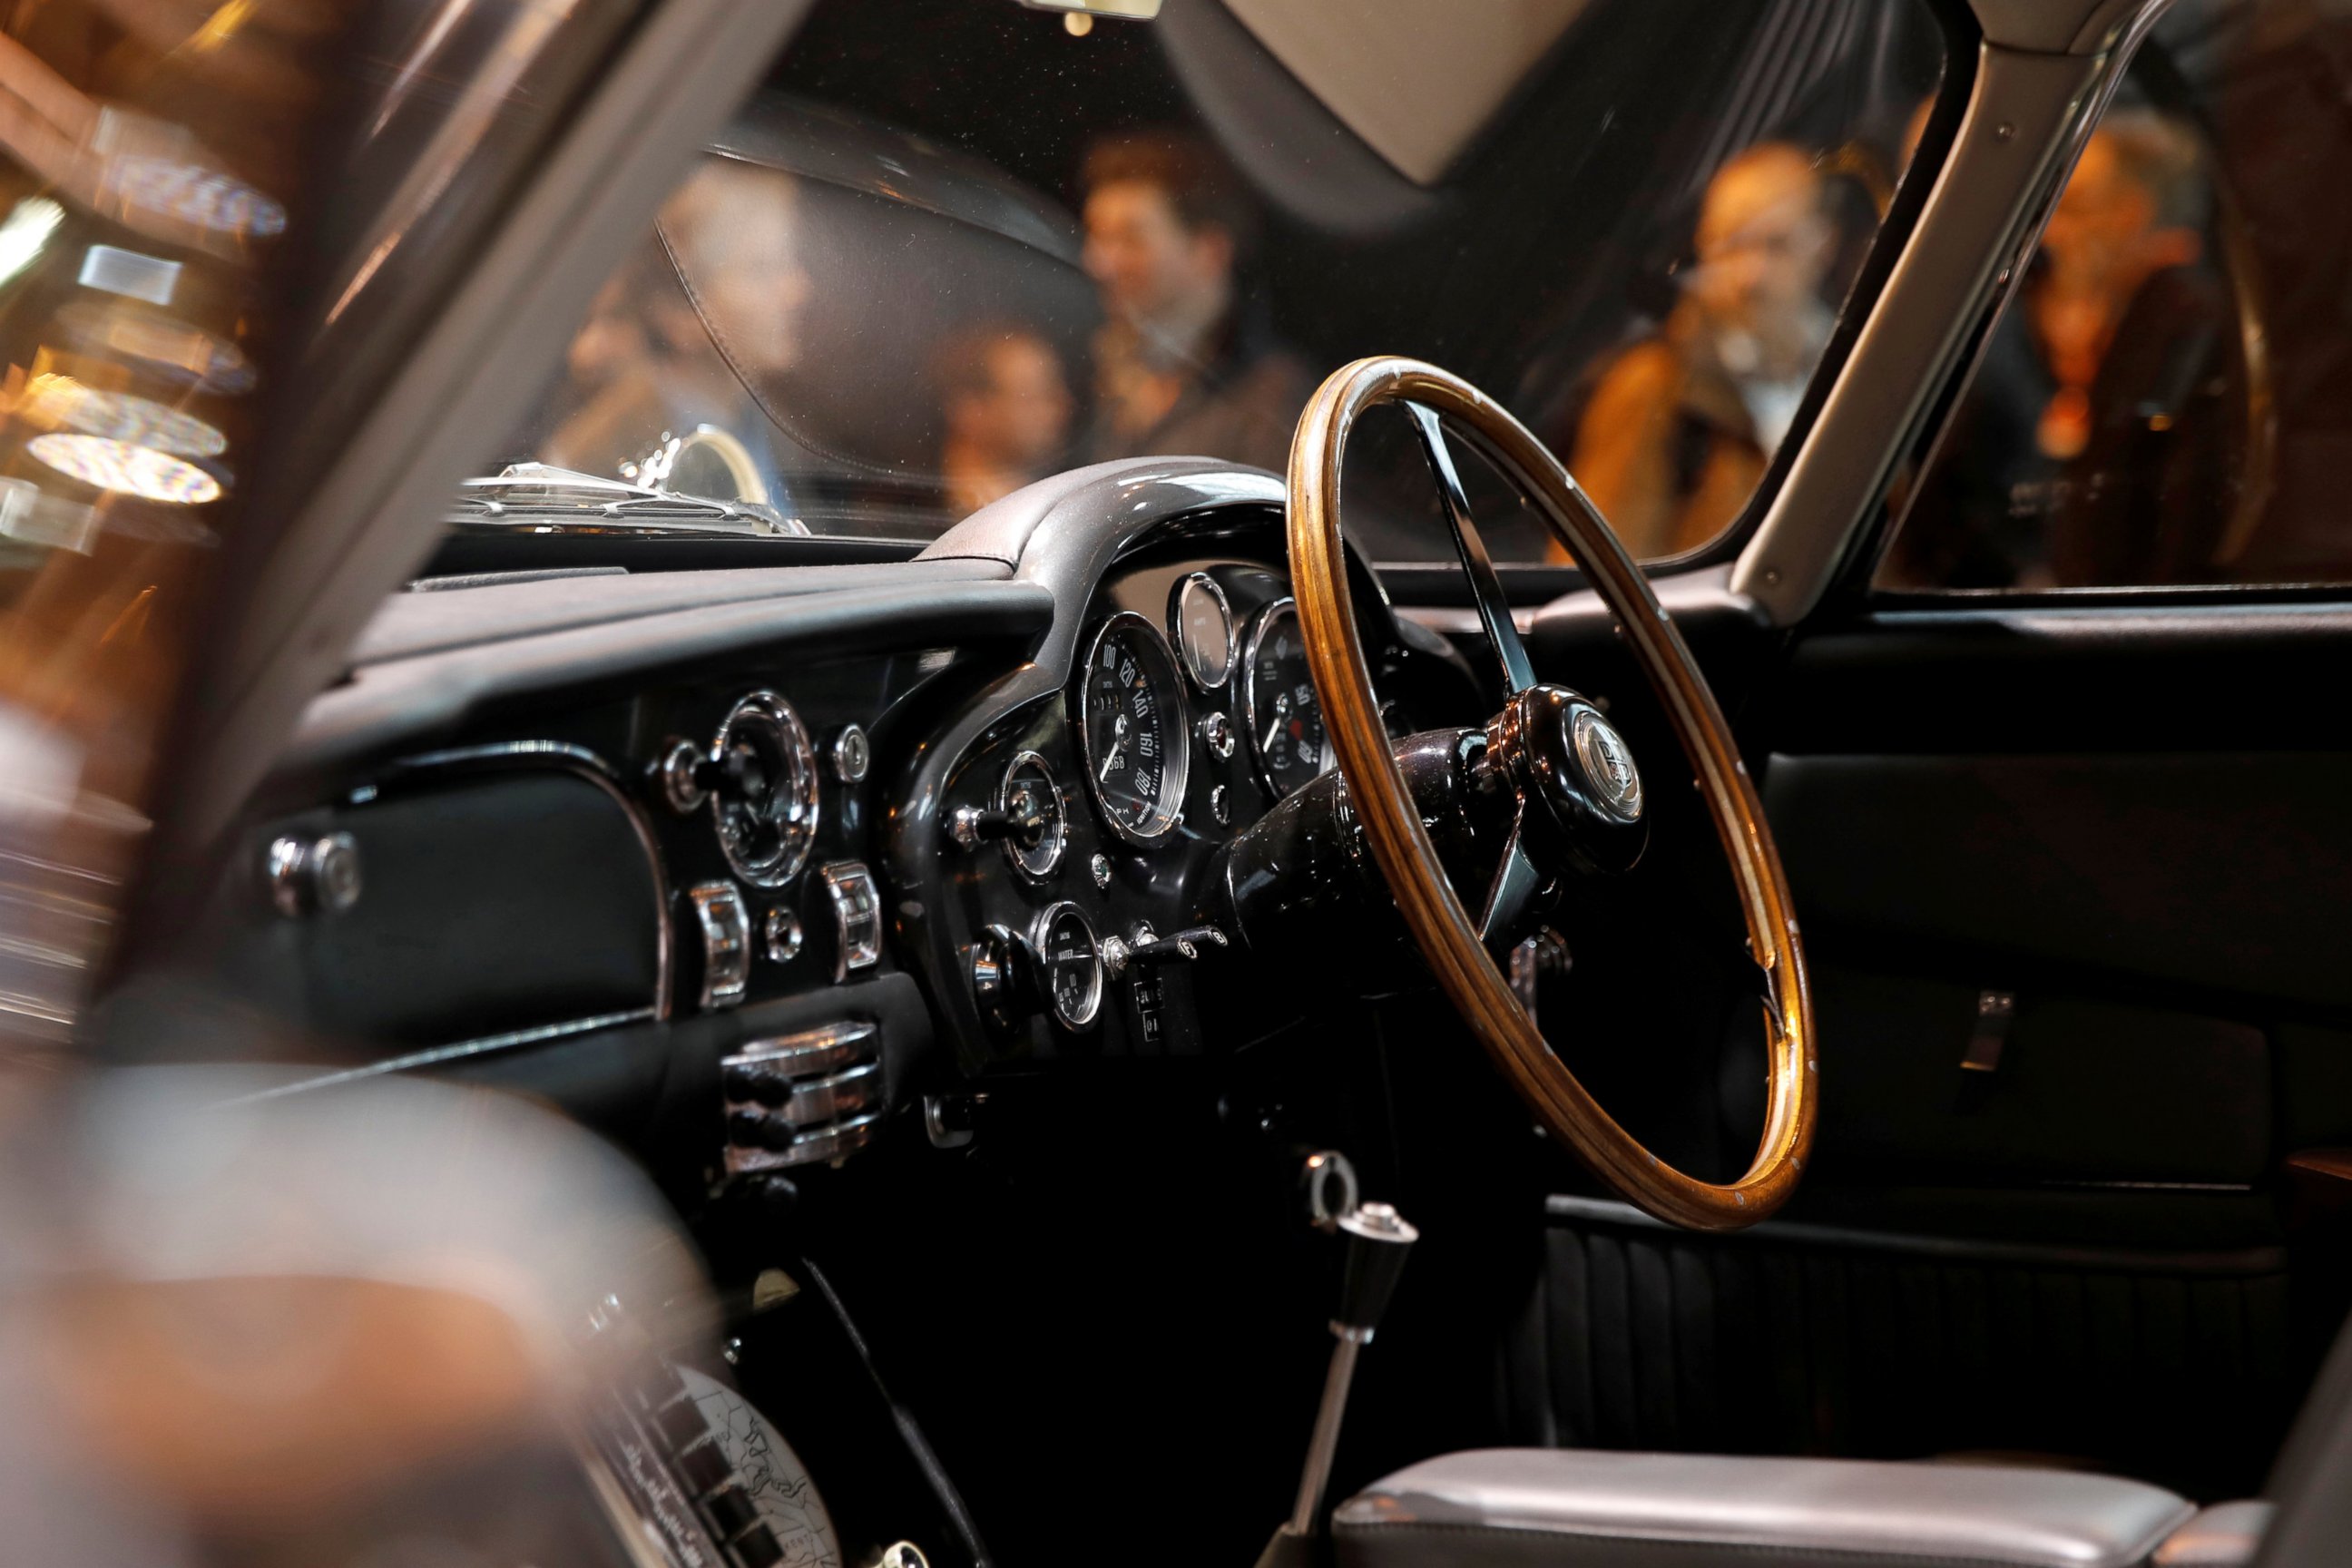 PHOTO: The 1964 Aston Martin DB5 driven by actor Sean Connery as James Bond in both Goldfinger and Thunderball films is displayed at the Paris Retromobile fair in Paris, France, Feb. 8, 2017.